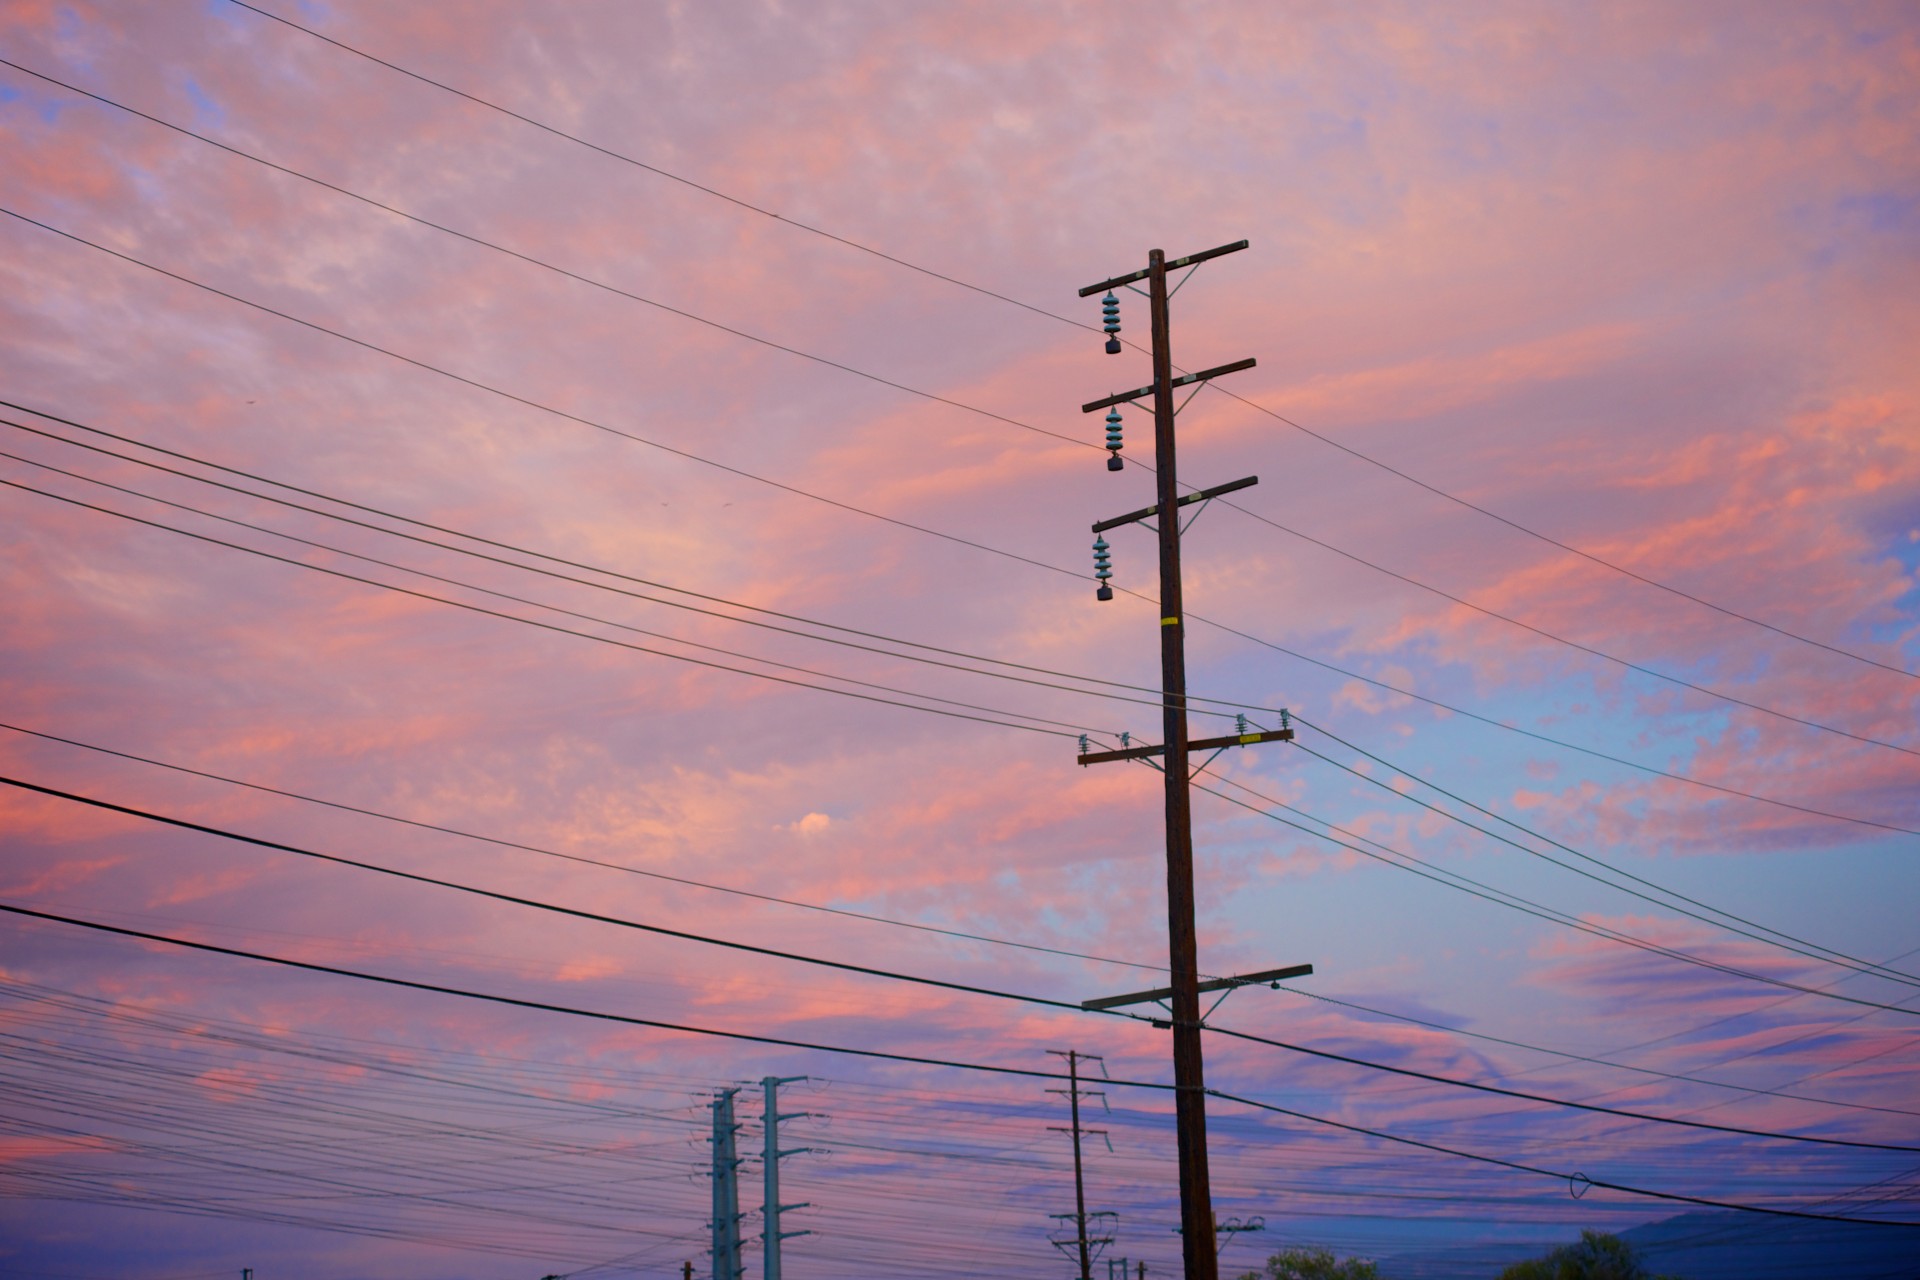 An electrical power line at sunset.